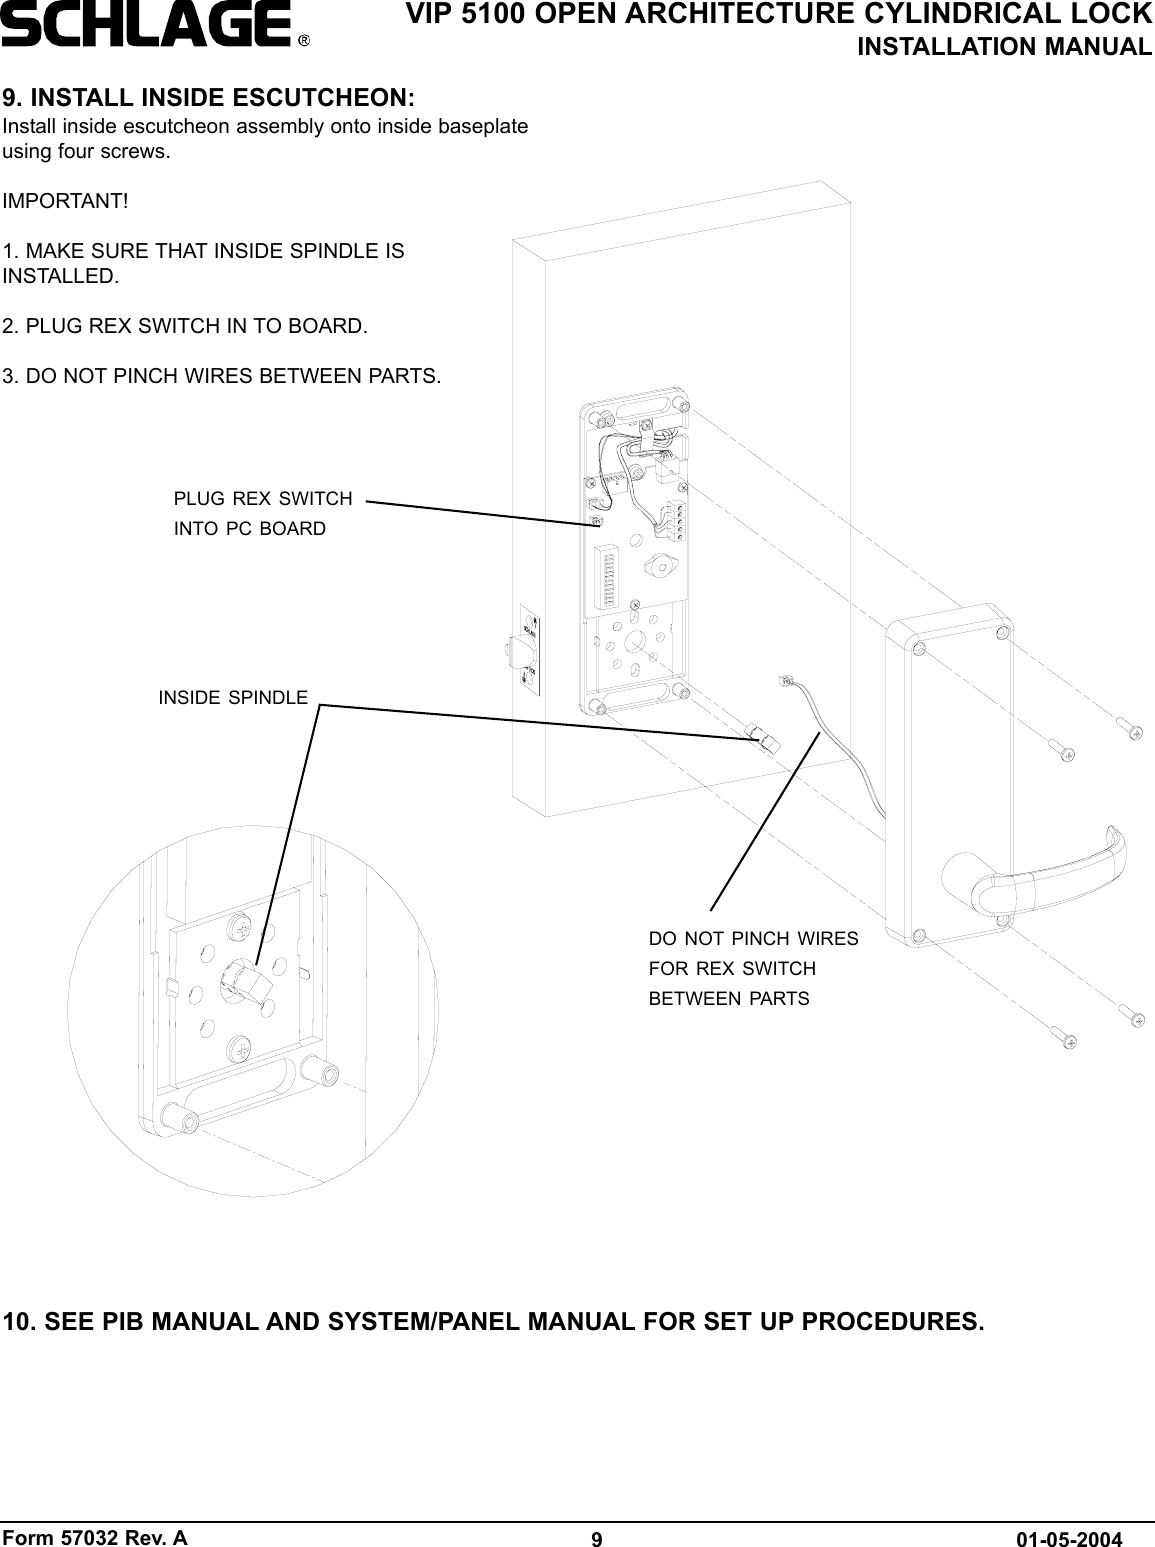 Form 57032 Rev. A 9VIP 5100 OPEN ARCHITECTURE CYLINDRICAL LOCKINSTALLATION MANUAL01-05-20049. INSTALL INSIDE ESCUTCHEON:Install inside escutcheon assembly onto inside baseplateusing four screws.IMPORTANT!1. MAKE SURE THAT INSIDE SPINDLE ISINSTALLED. 2. PLUG REX SWITCH IN TO BOARD.3. DO NOT PINCH WIRES BETWEEN PARTS.10. SEE PIB MANUAL AND SYSTEM/PANEL MANUAL FOR SET UP PROCEDURES.INSIDE SPINDLEPLUG REX SWITCHINTO PC BOARDDO NOT PINCH WIRESFOR REX SWITCHBETWEEN PARTS